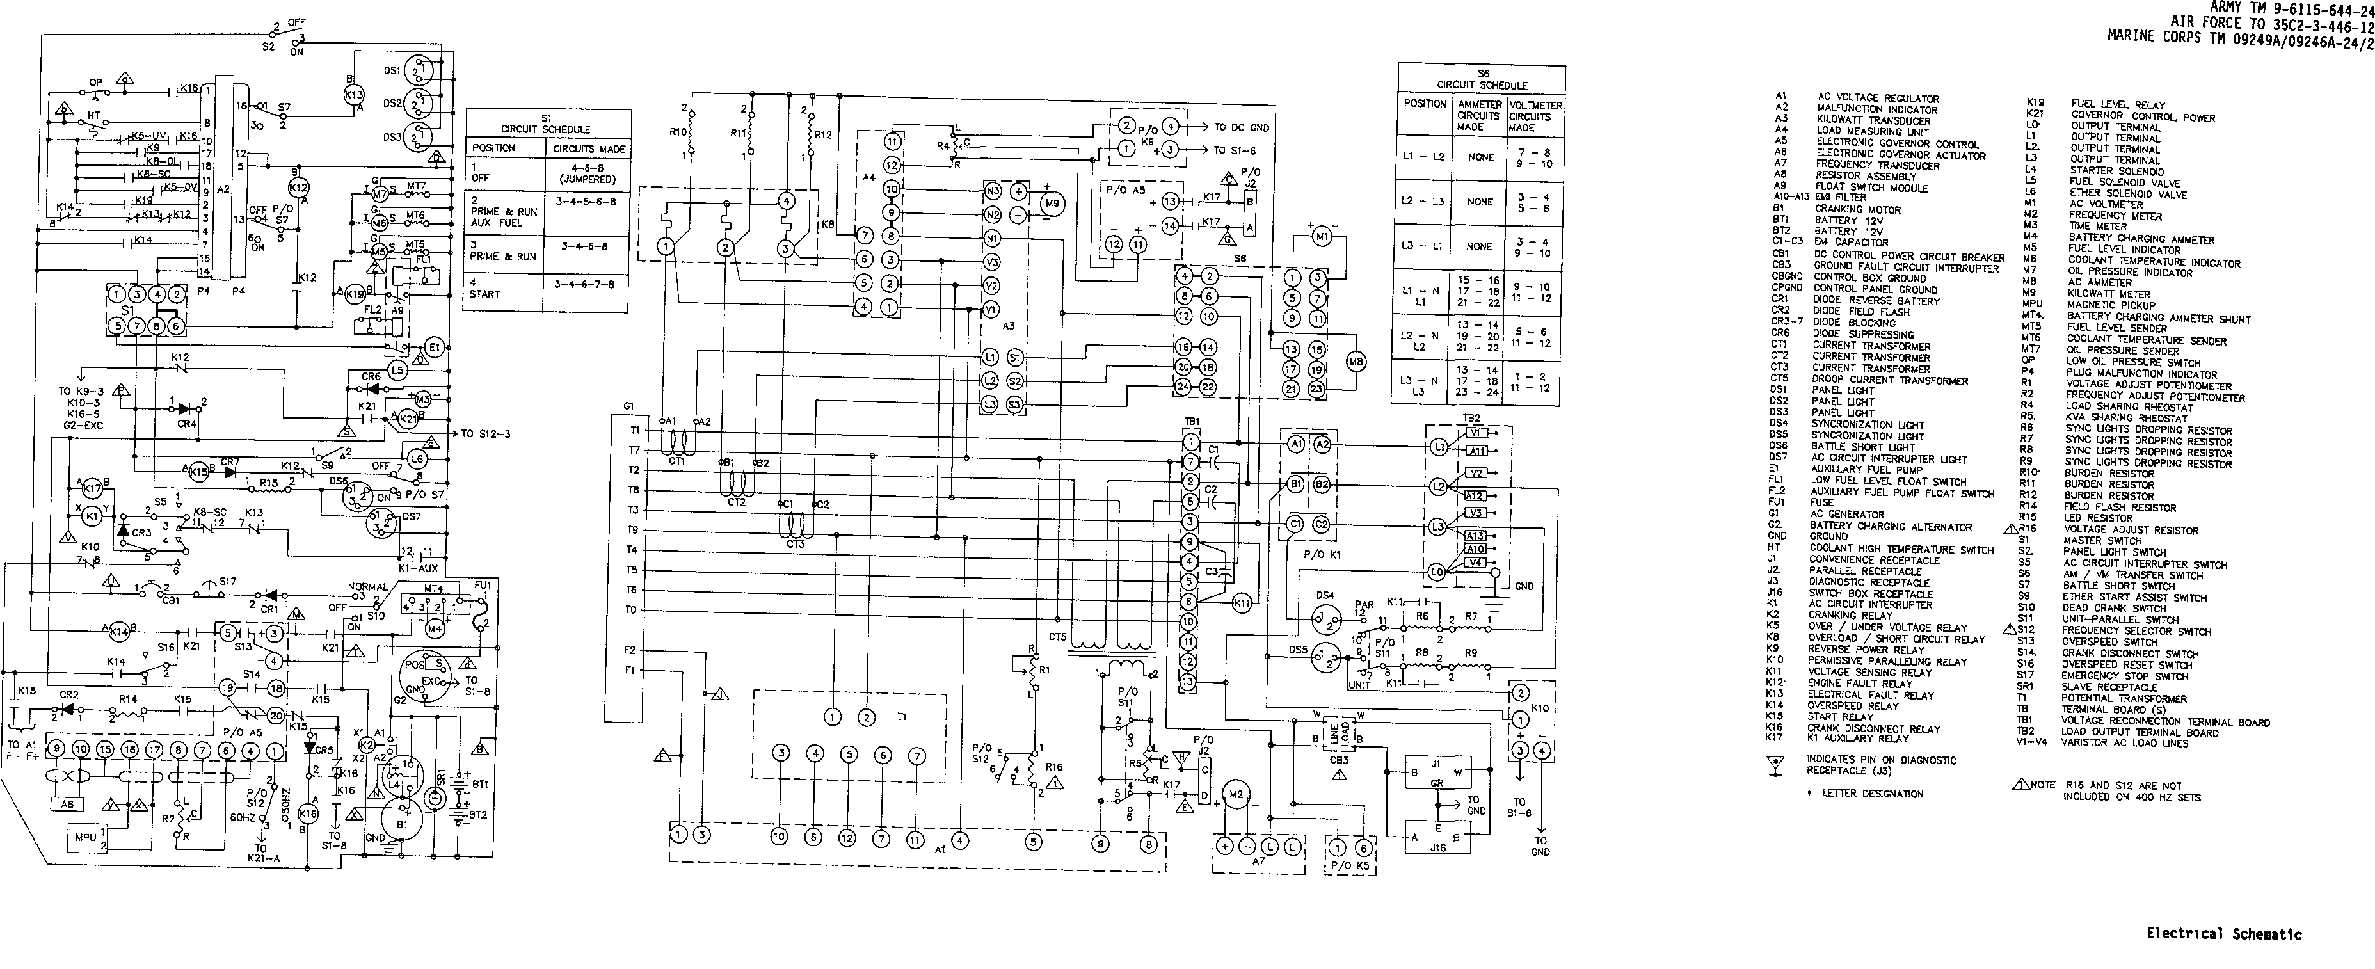 OF-1. Electrical Schematic